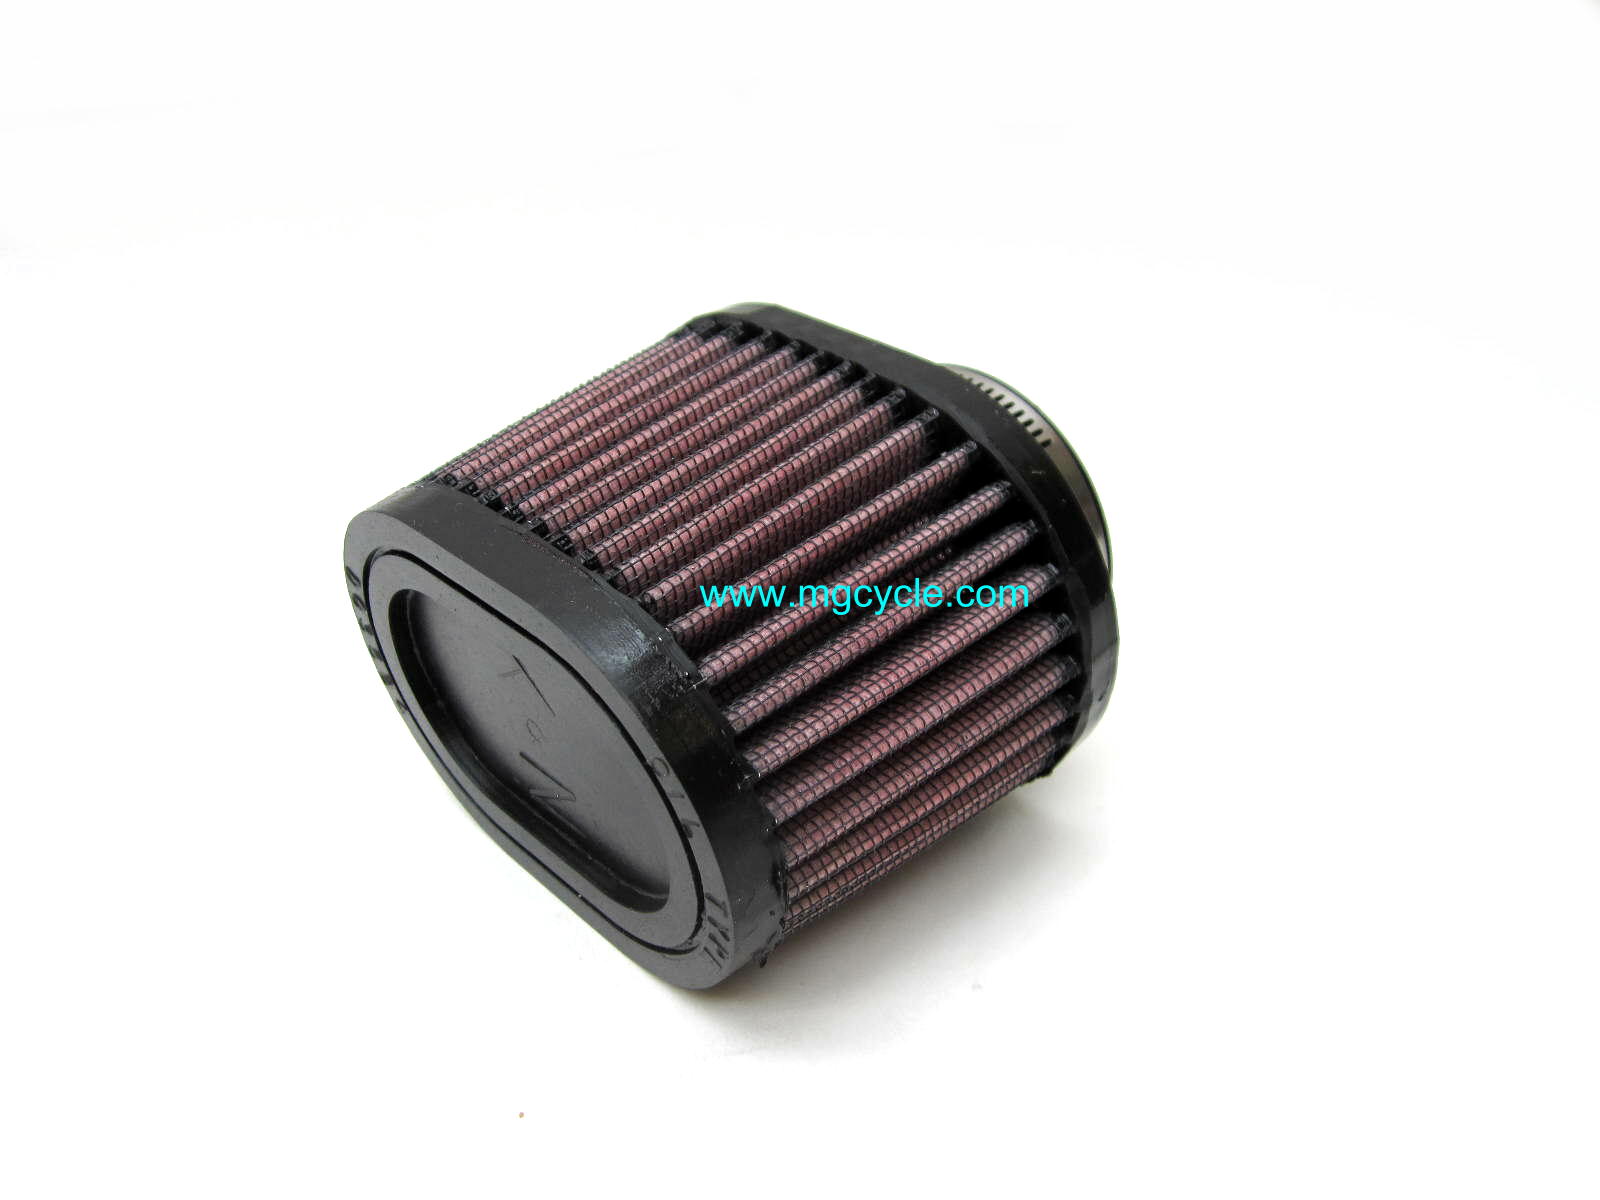 K&N air filter for PHF30/32/34/36 - T3 etc style velocity stacks